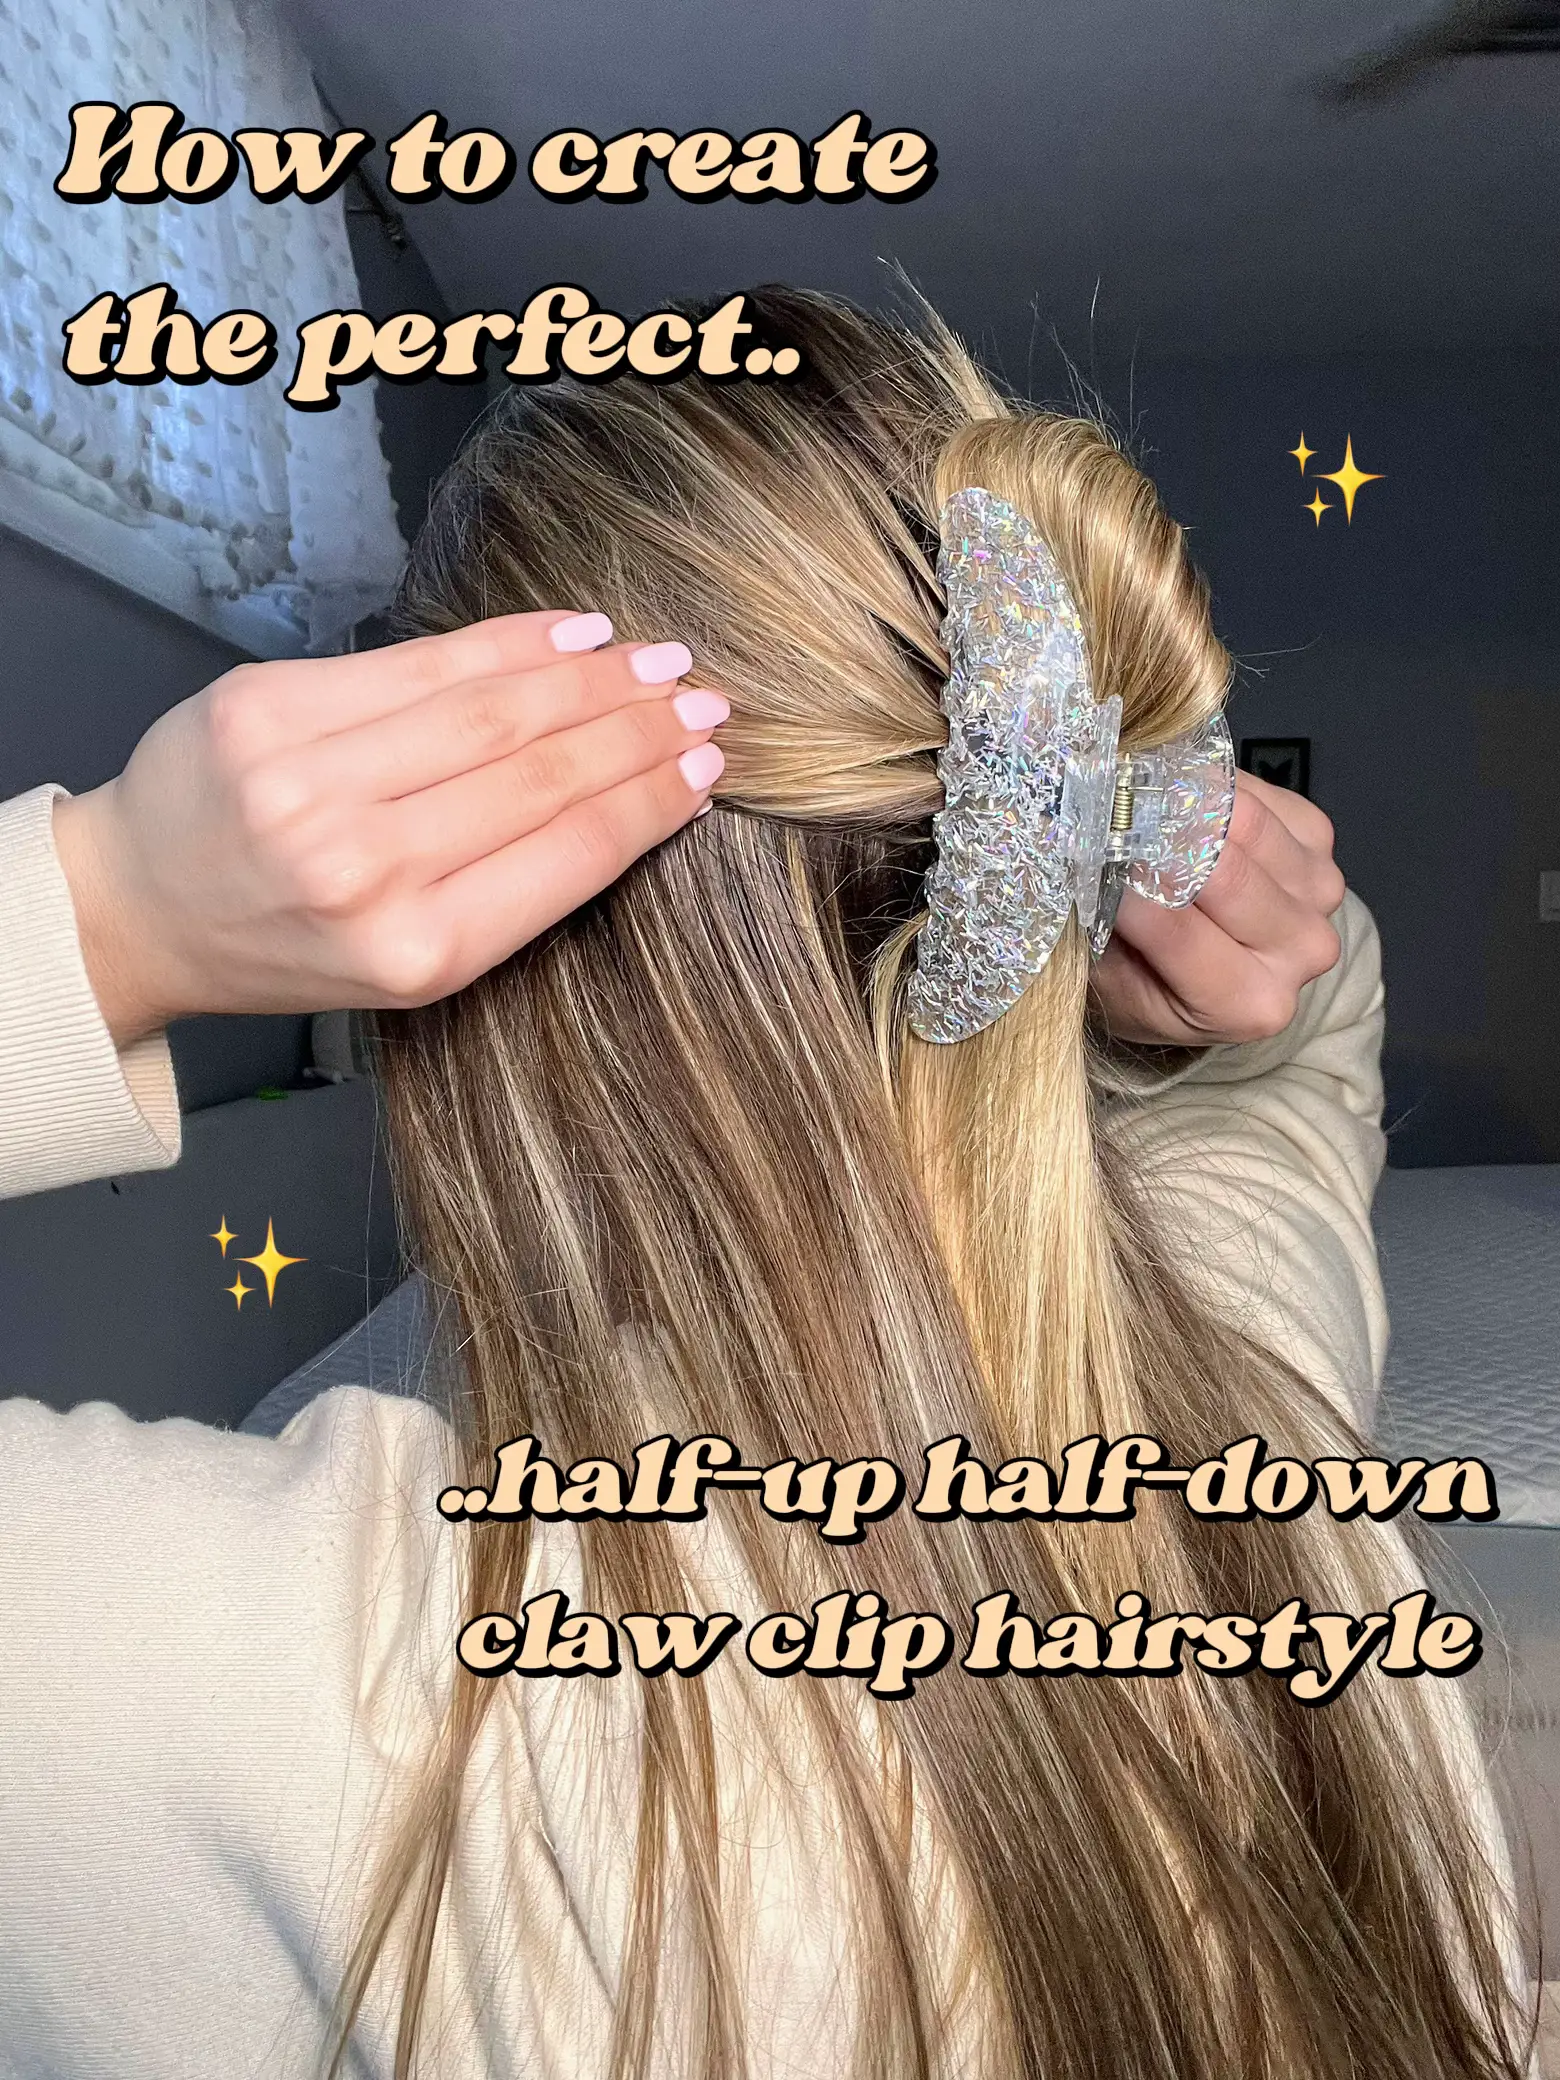 Half Up Claw Clip Tutorial, Video published by Michelle Kramer